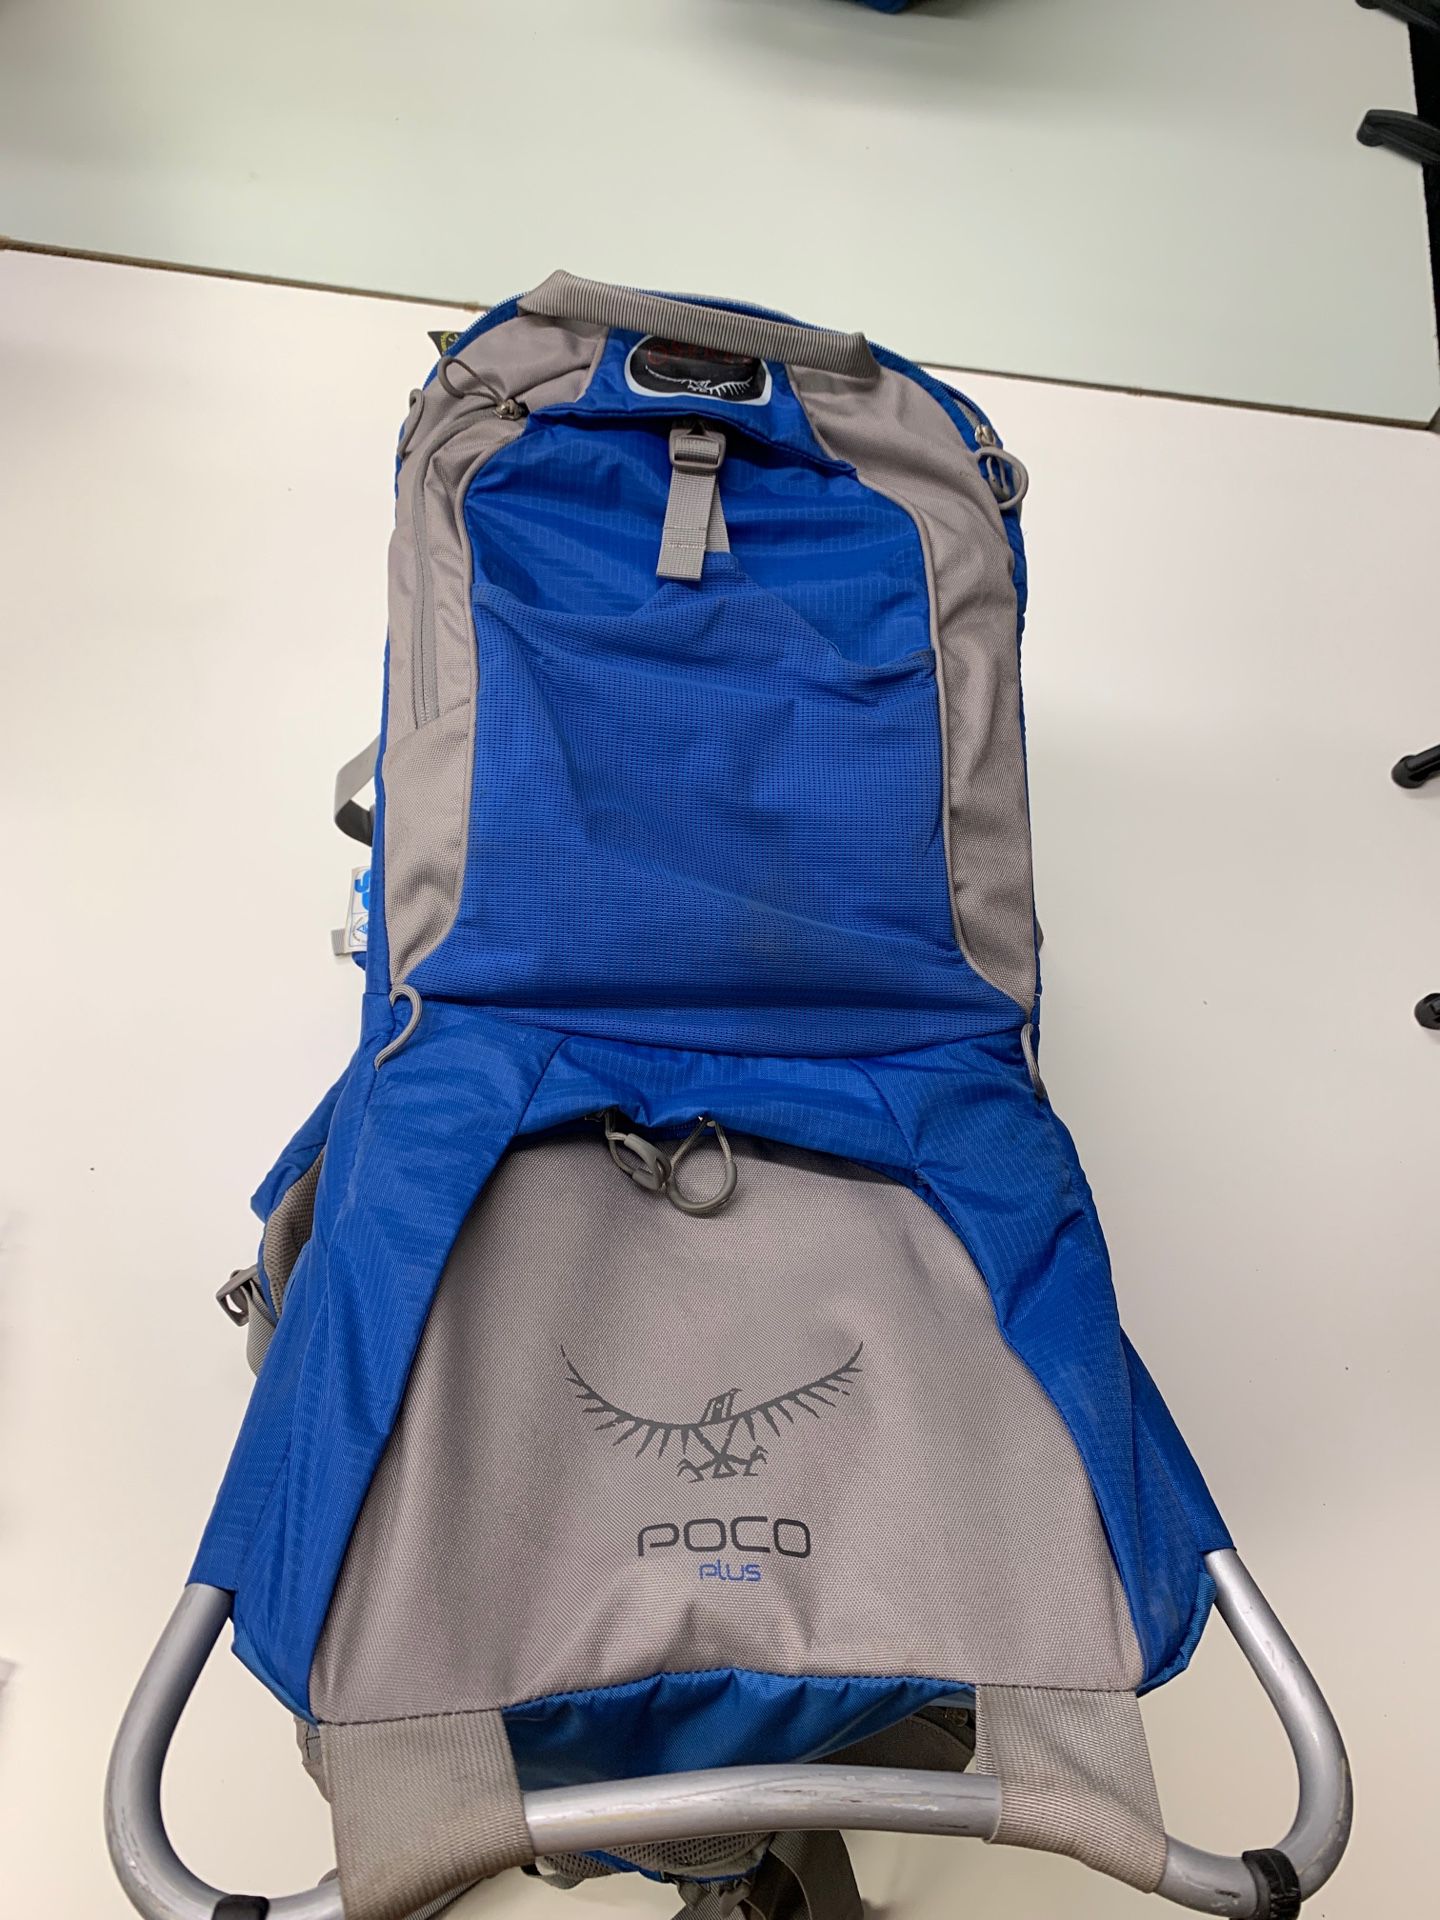 Osprey Poco Plus Baby Child Carrier Backpacking hiking camping Blue